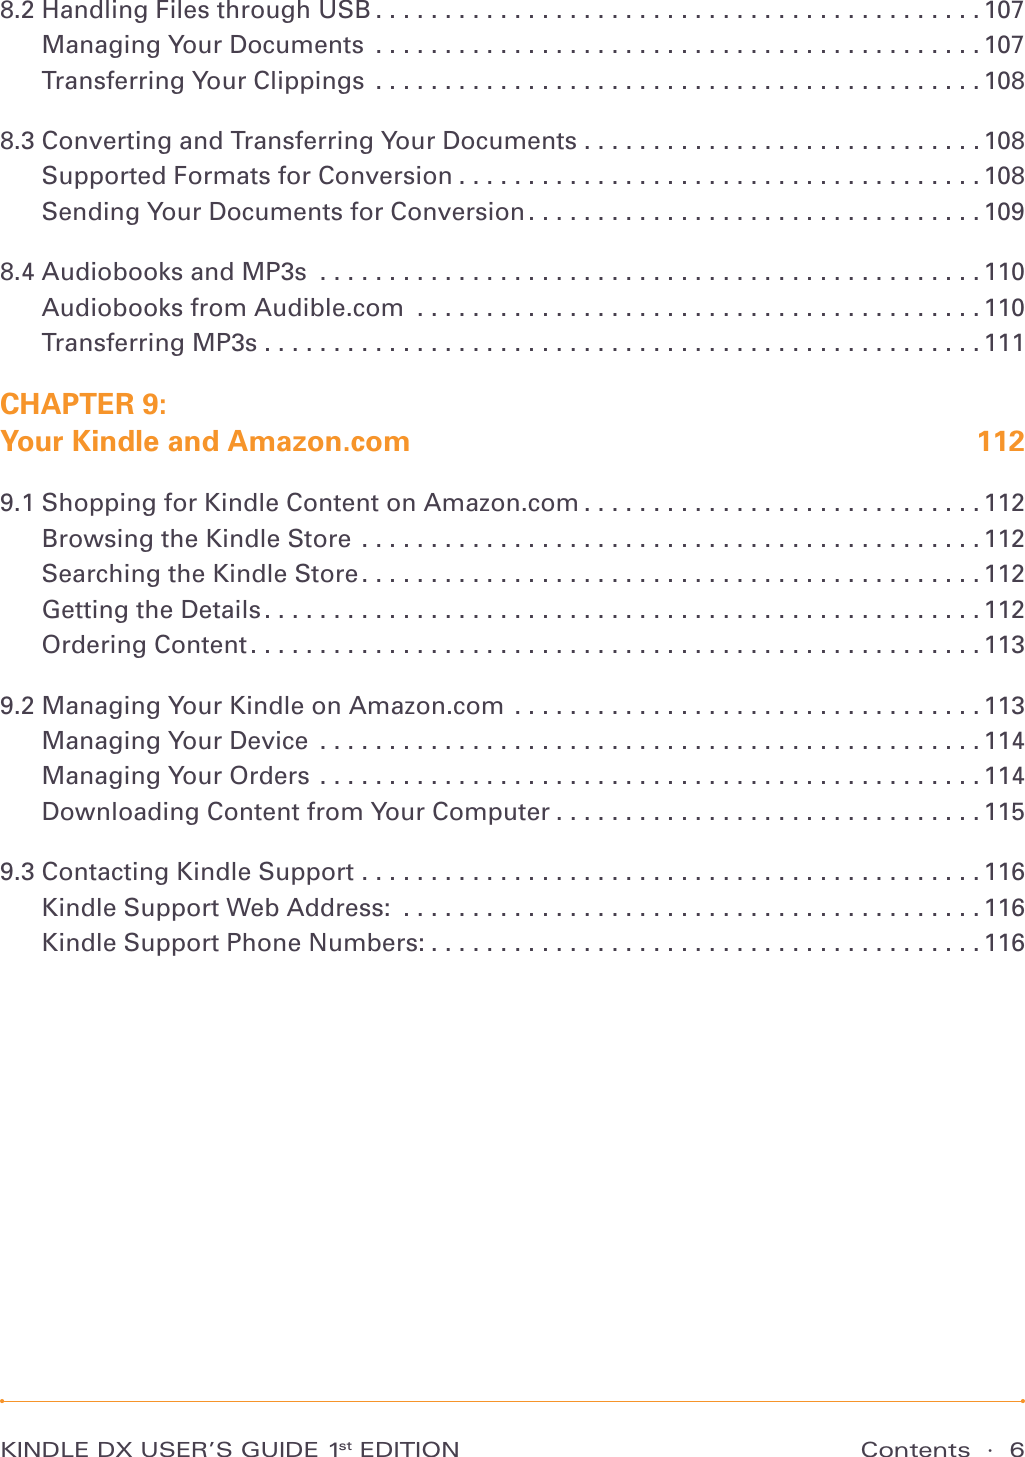 Contents  ·  6KINDLE DX USER’S GUIDE 1st EDITION8.2 Handling Files through USB ............................................107Managing Your Documents ............................................107Transferring Your Clippings  ............................................1088.3 Converting and Transferring Your Documents . . . . . . . . . . . . . . . . . . . . . . . . . . . . . 108Supported Formats for Conversion . . . . . . . . . . . . . . . . . . . . . . . . . . . . . . . . . . . . . . 108Sending Your Documents for Conversion . . . . . . . . . . . . . . . . . . . . . . . . . . . . . . . . . 1098.4 Audiobooks and MP3s ................................................110Audiobooks from Audible.com .........................................110Transferring MP3s ....................................................111CHAPTER 9:  Your Kindle and Amazon.com  1129.1 Shopping for Kindle Content on Amazon.com . . . . . . . . . . . . . . . . . . . . . . . . . . . . . 112Browsing the Kindle Store .............................................112Searching the Kindle Store .............................................112Getting the Details ....................................................112Ordering Content .....................................................1139.2 Managing Your Kindle on Amazon.com  . . . . . . . . . . . . . . . . . . . . . . . . . . . . . . . . . . 113Managing Your Device ................................................114Managing Your Orders ................................................114Downloading Content from Your Computer . . . . . . . . . . . . . . . . . . . . . . . . . . . . . . . 1159.3 Contacting Kindle Support  .............................................116Kindle Support Web Address: ..........................................116Kindle Support Phone Numbers: ........................................116